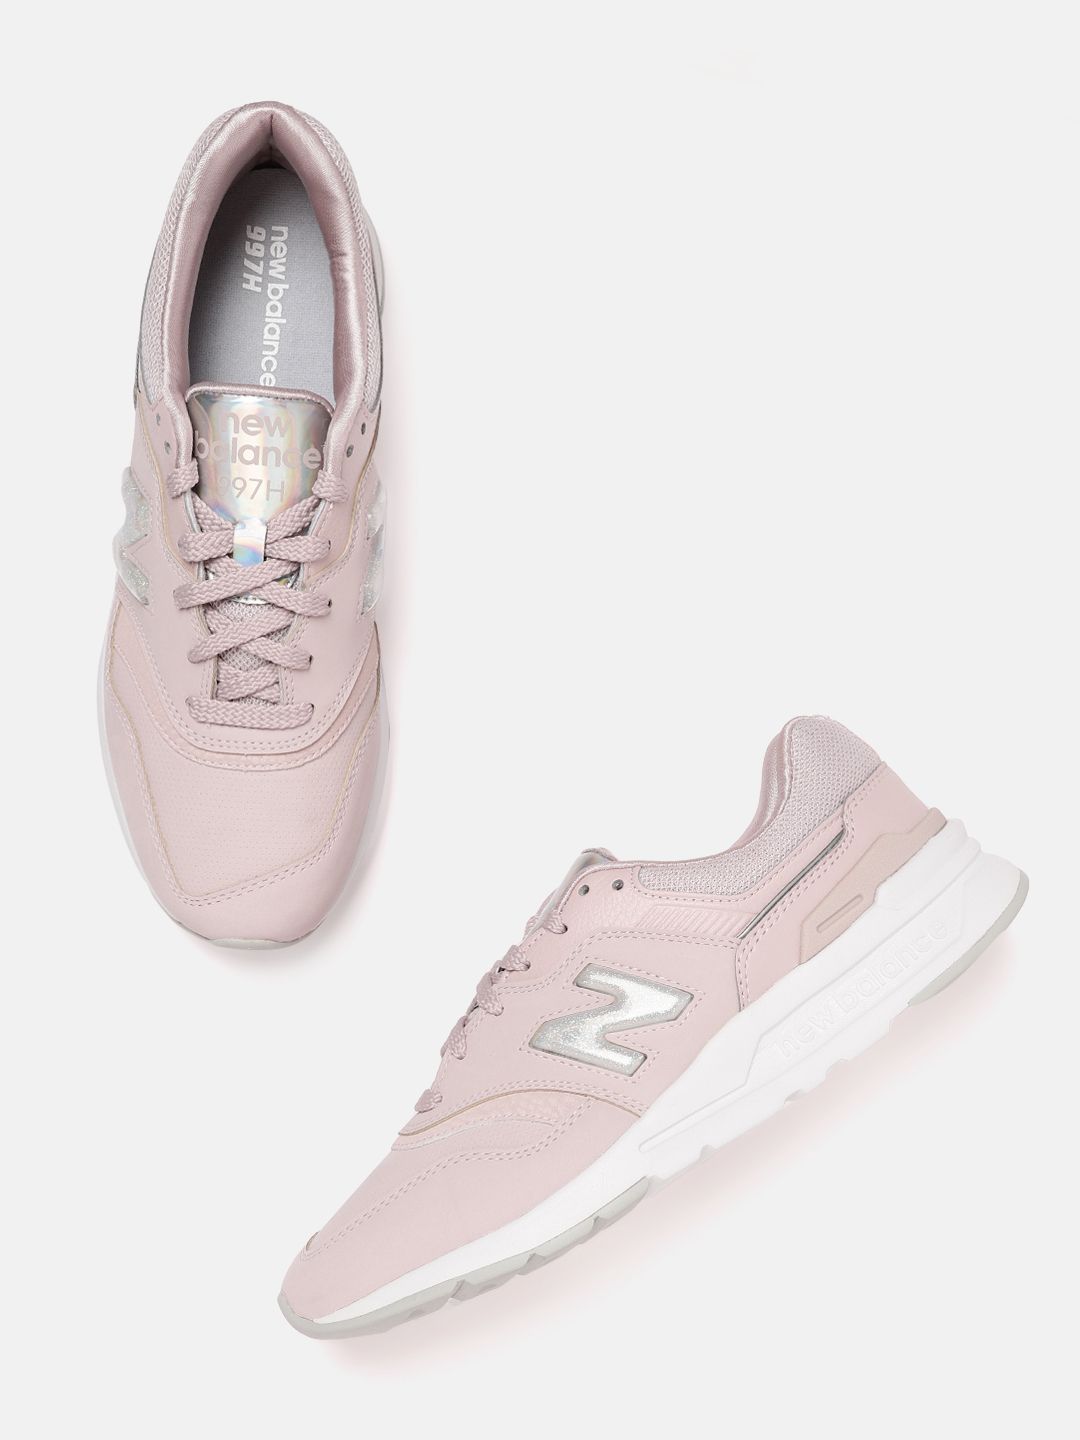 New Balance Women Pink Solid Sneakers Price in India